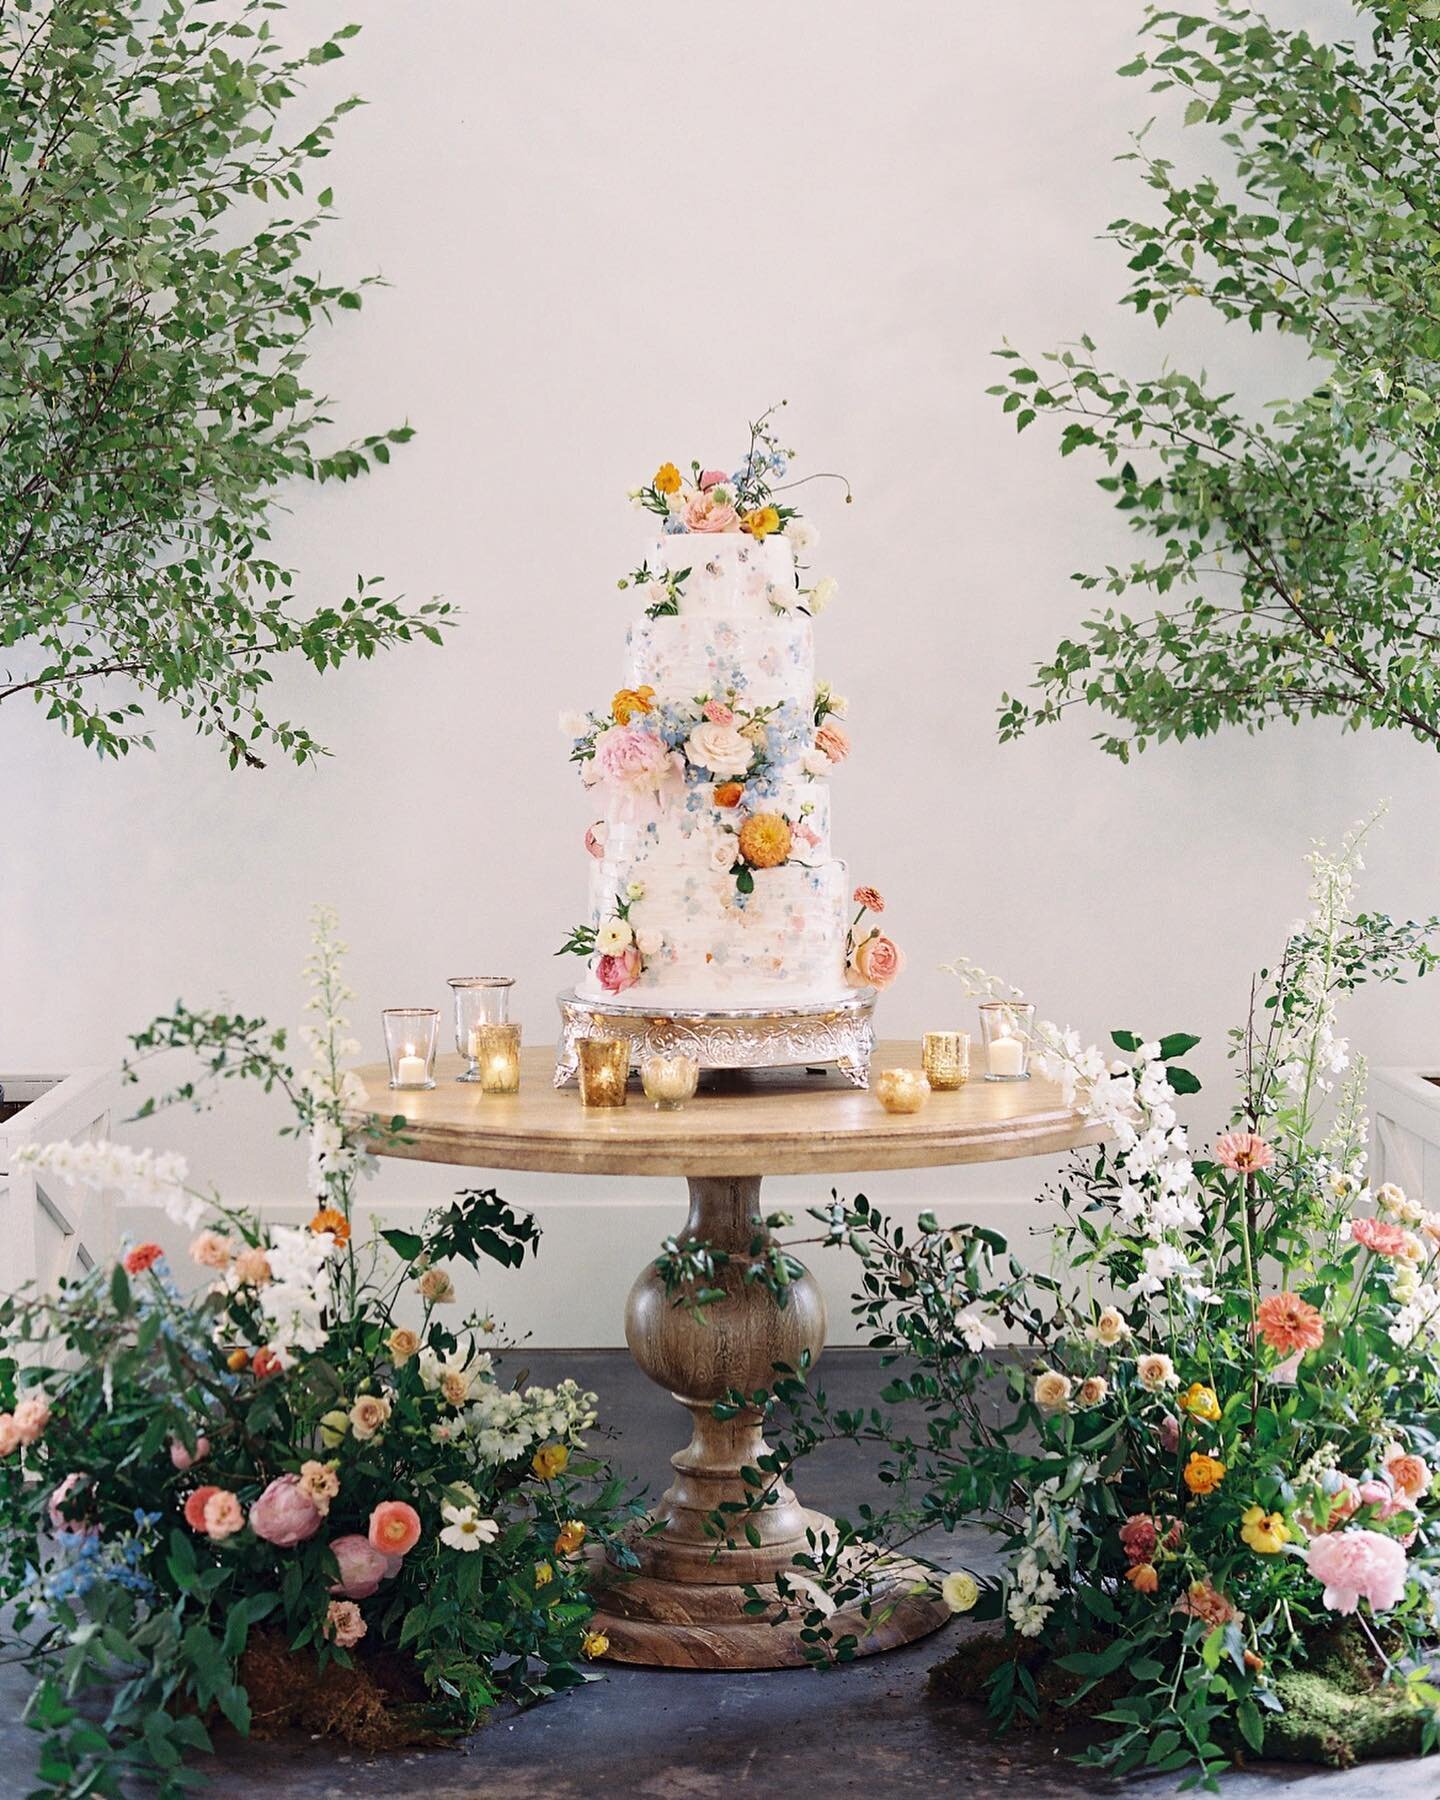 This will forever be a favorite wedding cake!

It was perfect in size, texture, and color story- and the pairing of the floor blooms and sourced trees was so ideal to frame this special moment. 

Photo @chrisisham